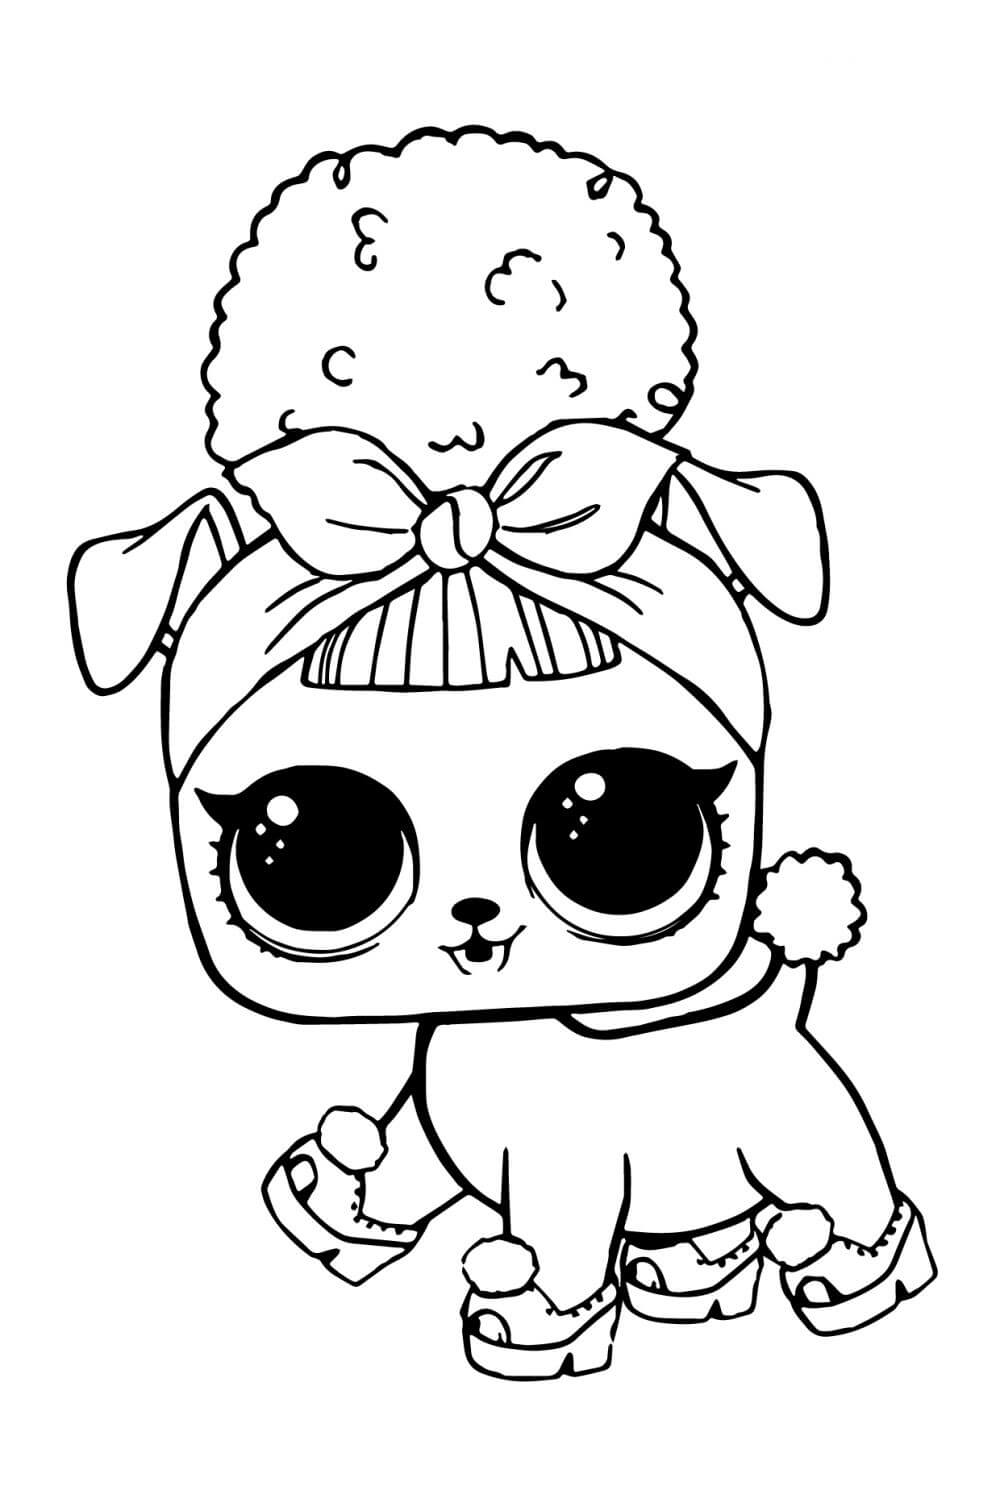 LOL Pet Puppy Bee Coloring Page   Free Printable Coloring Pages ...